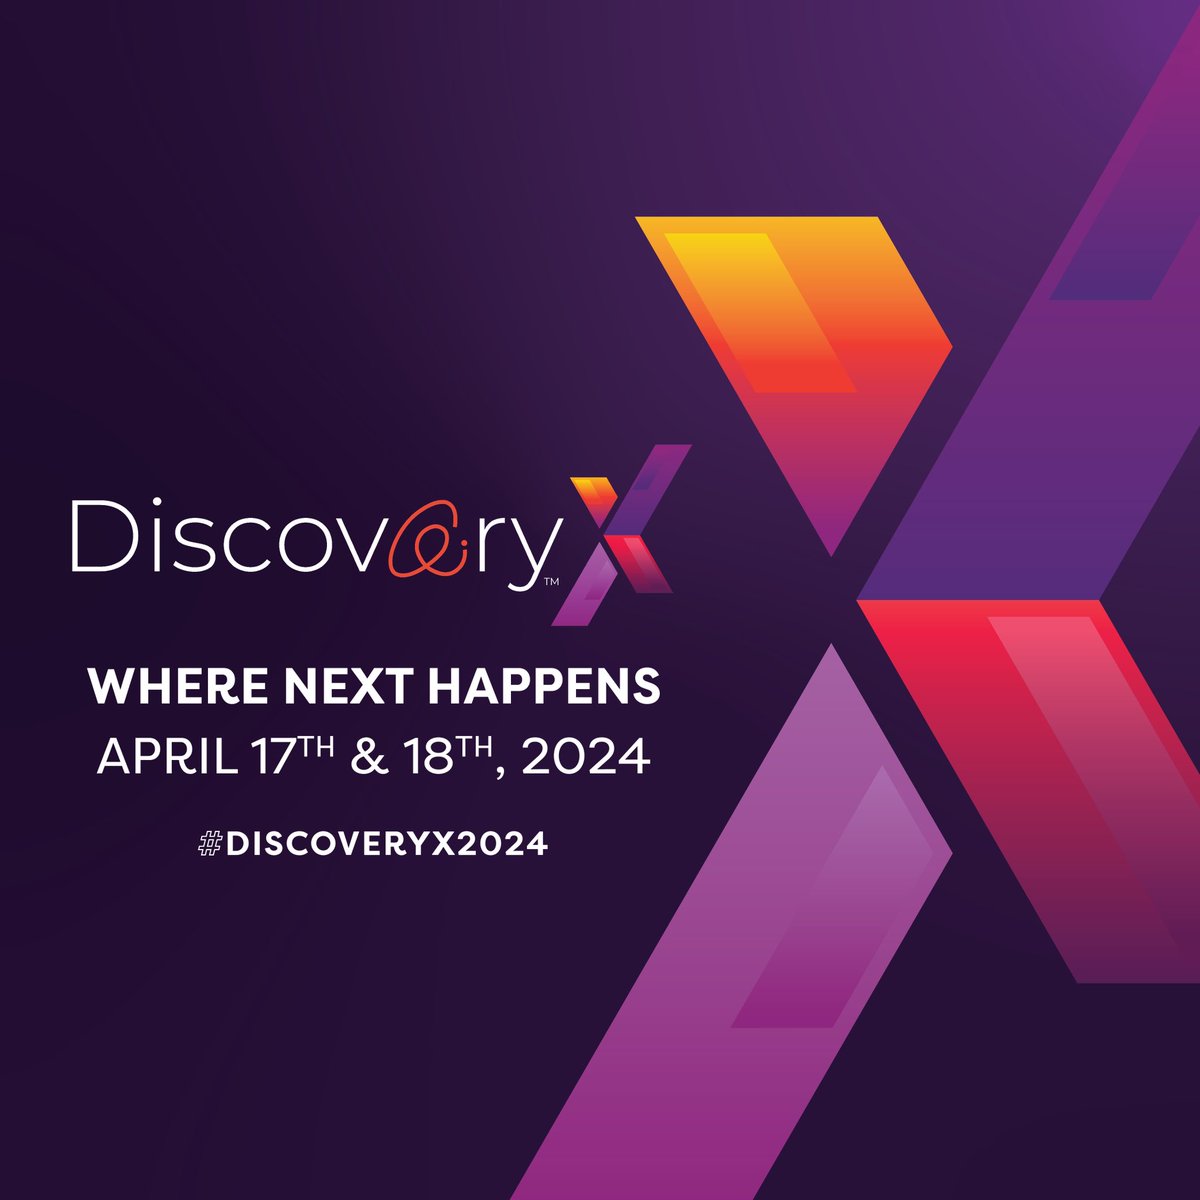 Our partners at @OCInnovation have Big News - Ontario’s tech event of the year is back and better than ever! 

Don’t miss out on the chance to be a part of #DiscoveryX, an immersive event that celebrates the forefront of innovation!
 
Get your ticket now: discoveryxconference.ca/home